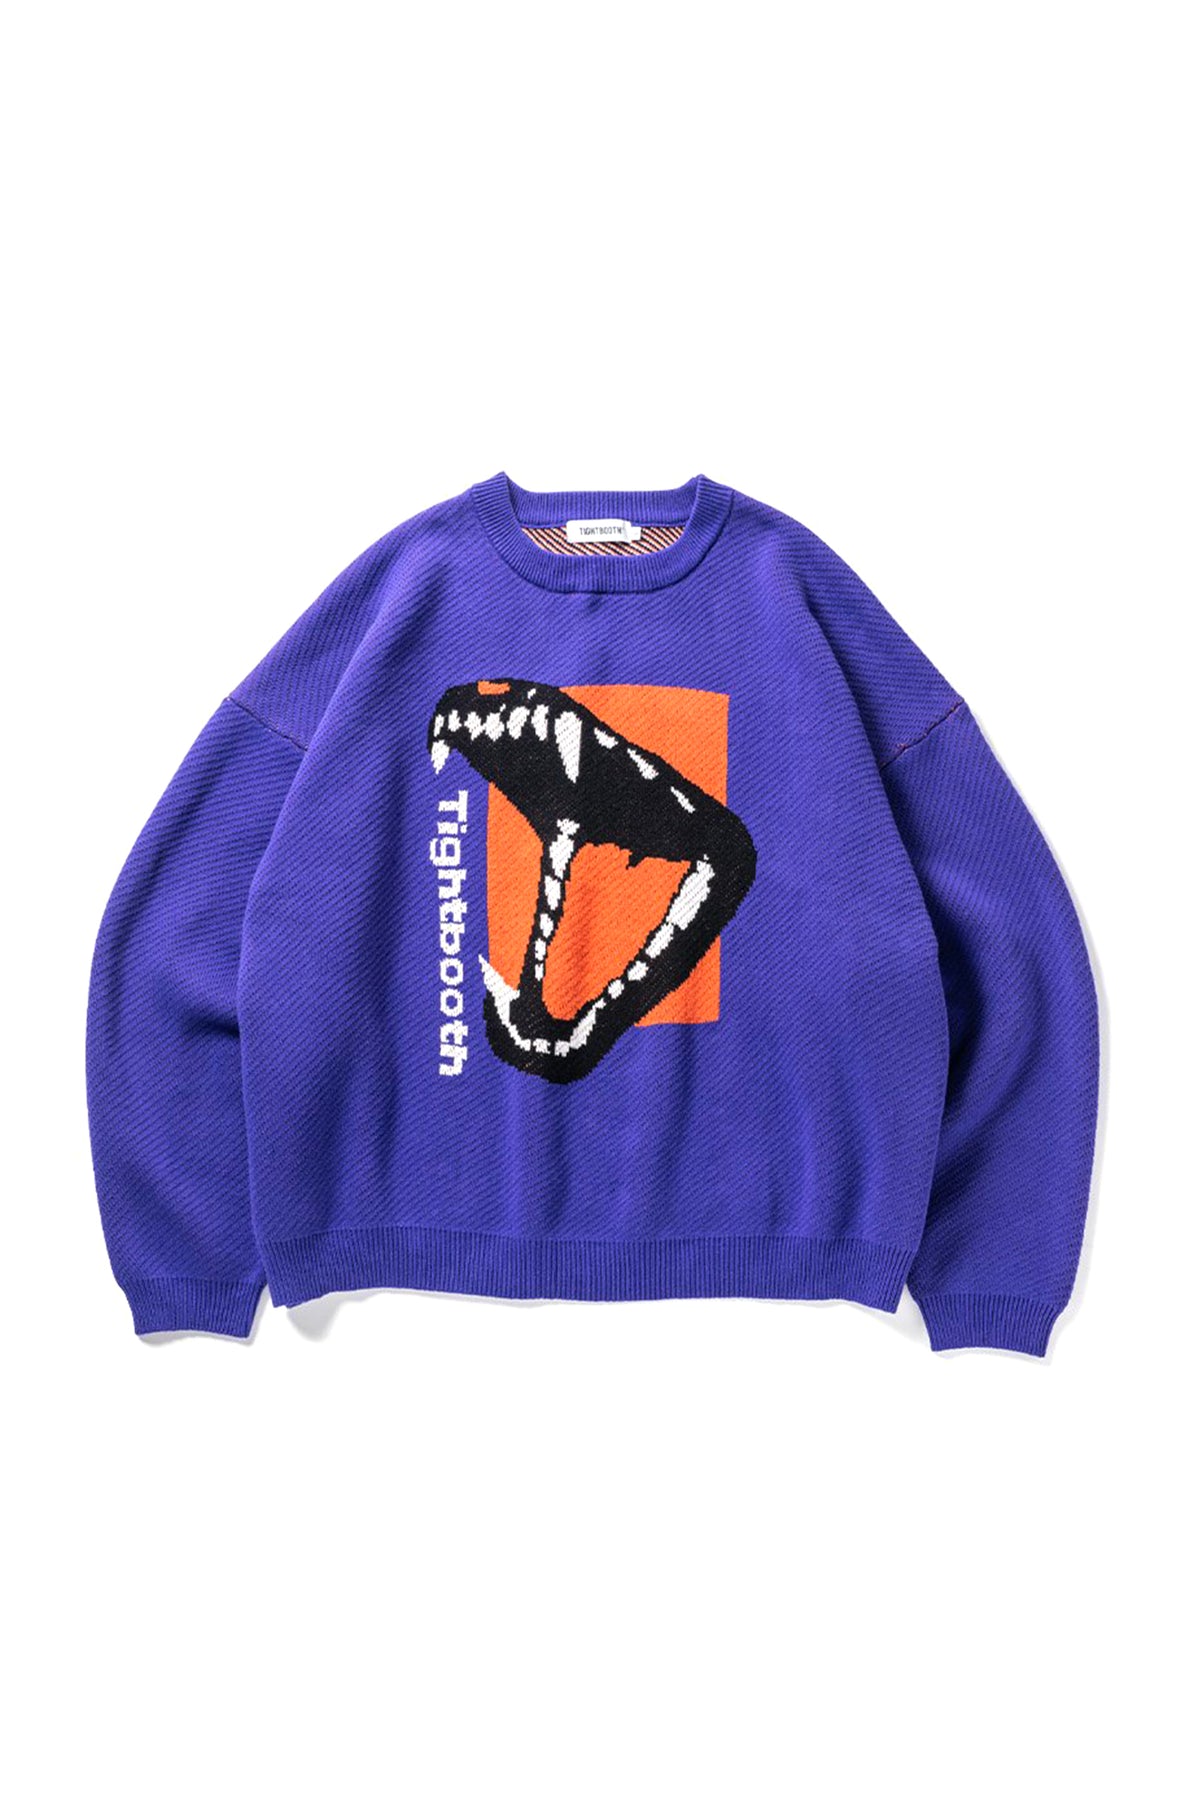 TIGHTBOOTH BITE KNIT SWEATER / PUR